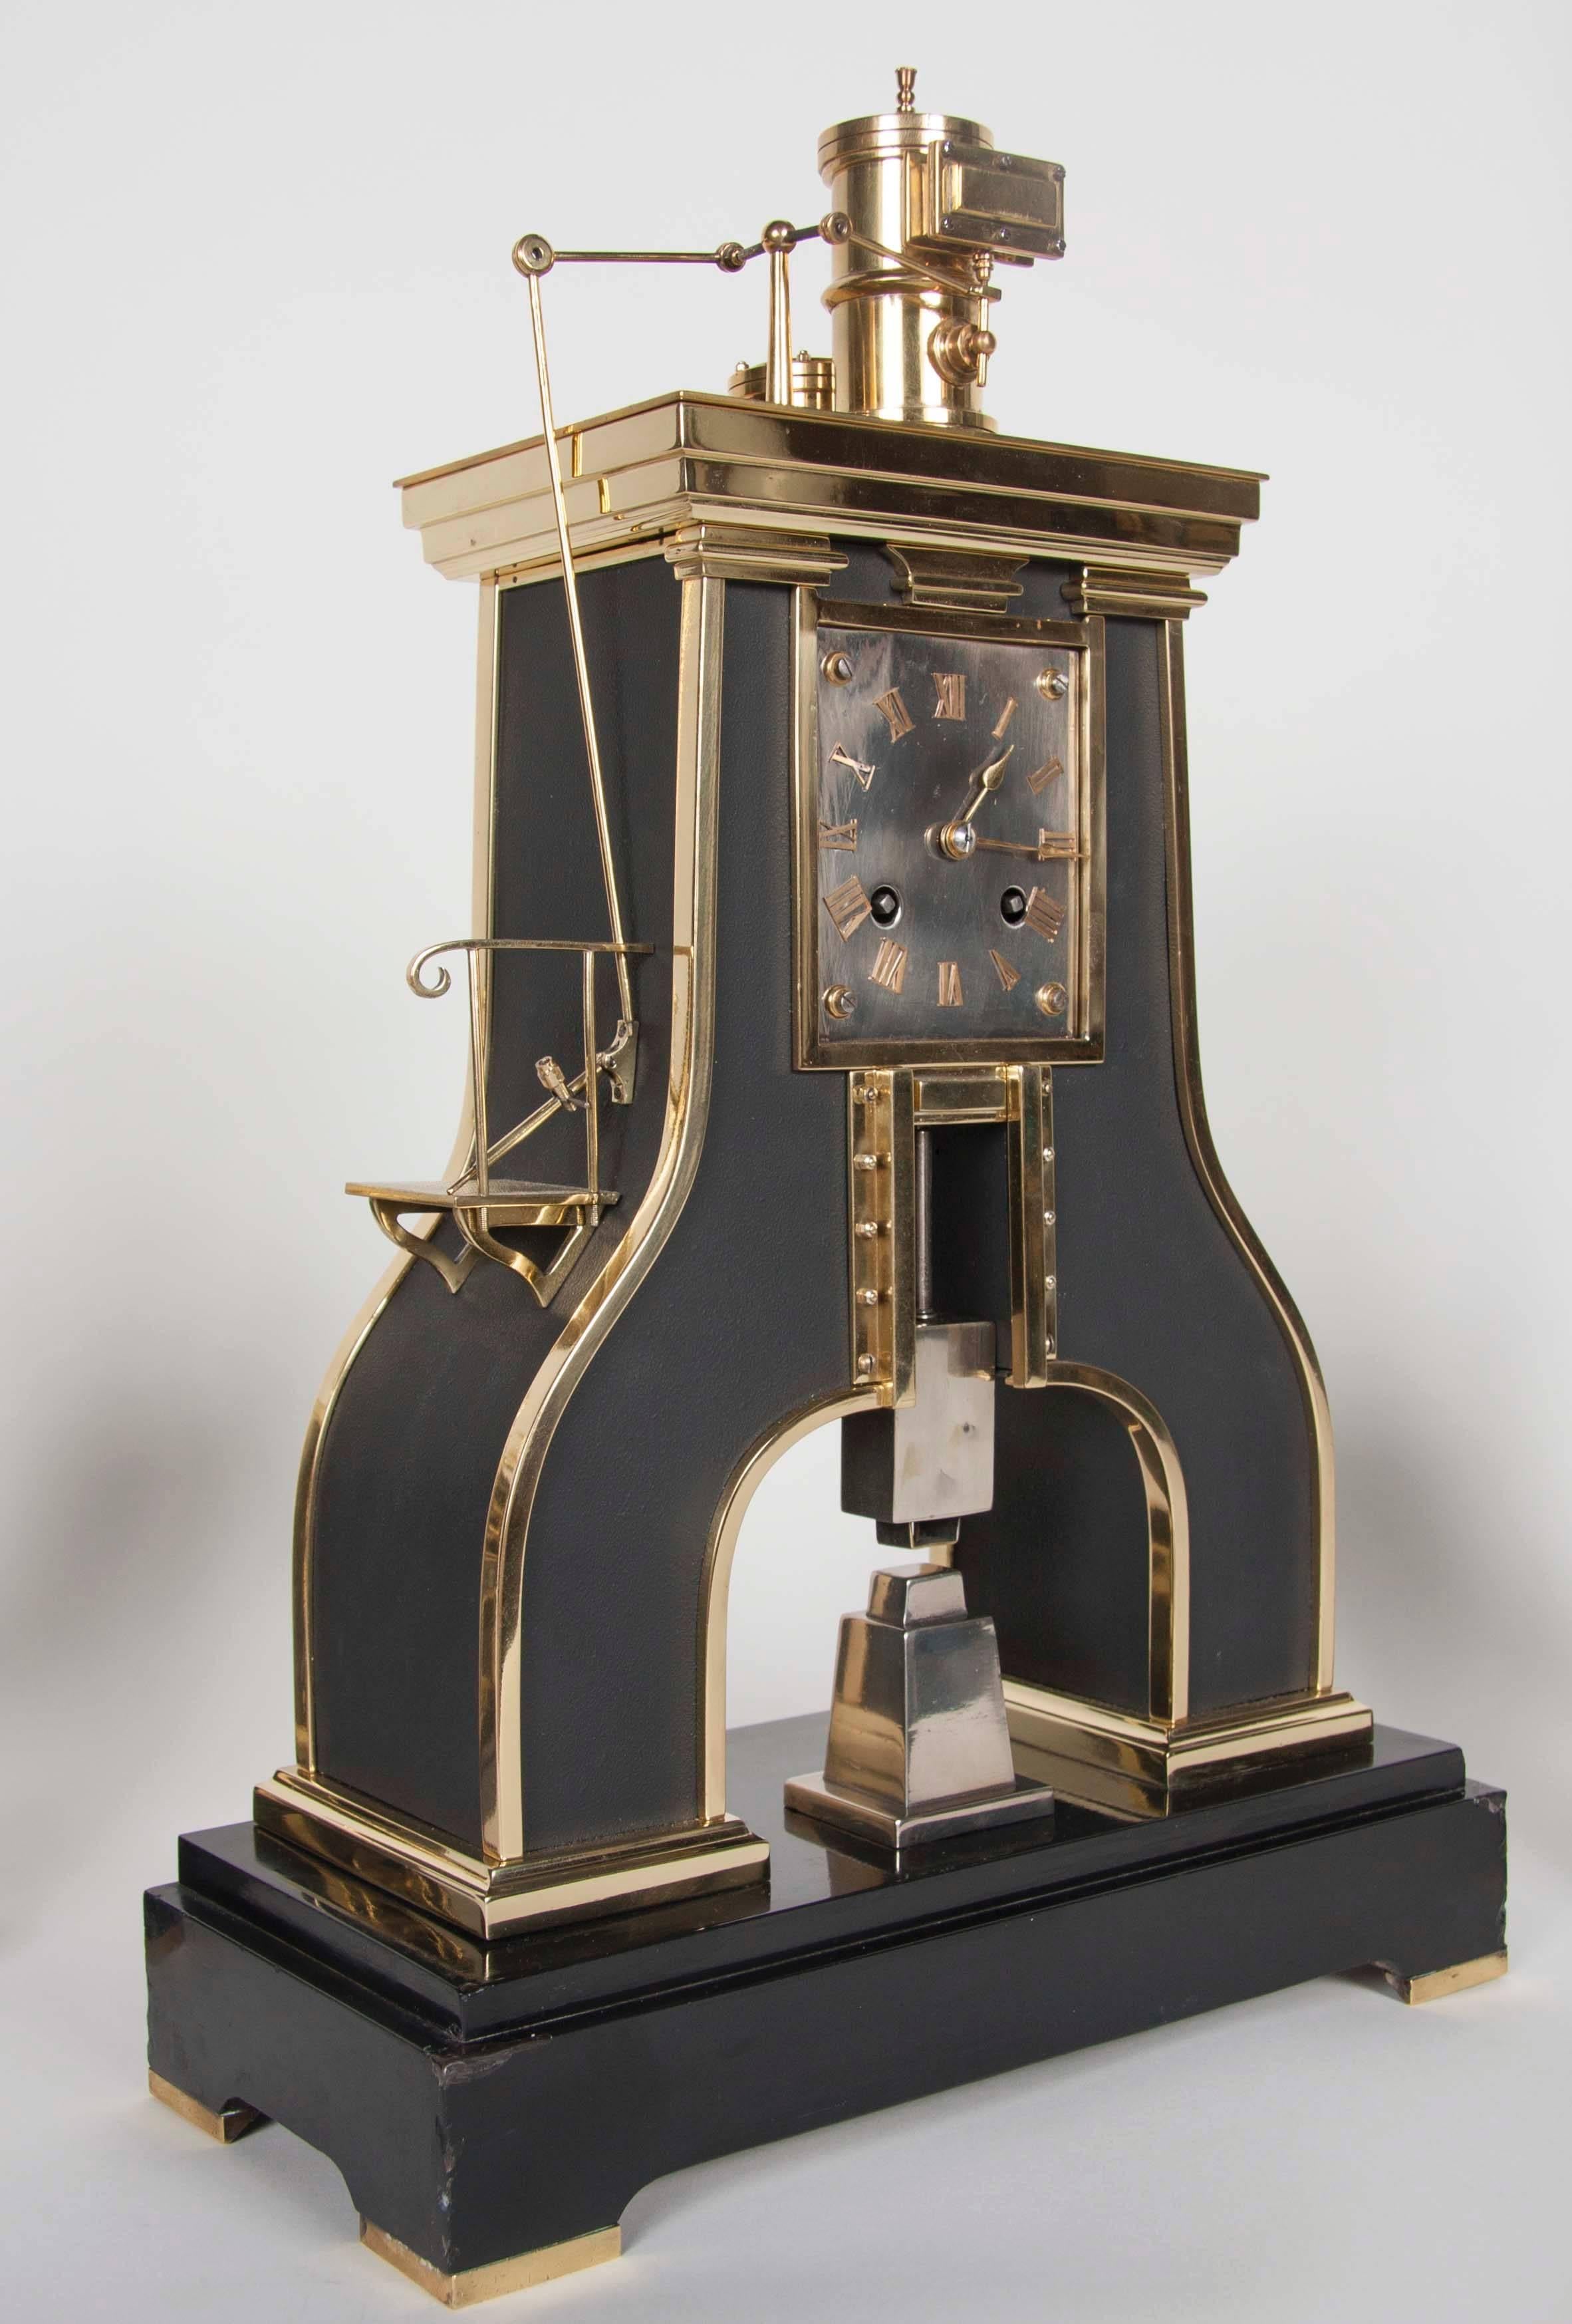 A handsome 19th century French clock set comprising a clock with a matching pair of candelabrum. French Industrial steam Hammer type with brass movement. Signed GLT Paris Japy Freres.
              